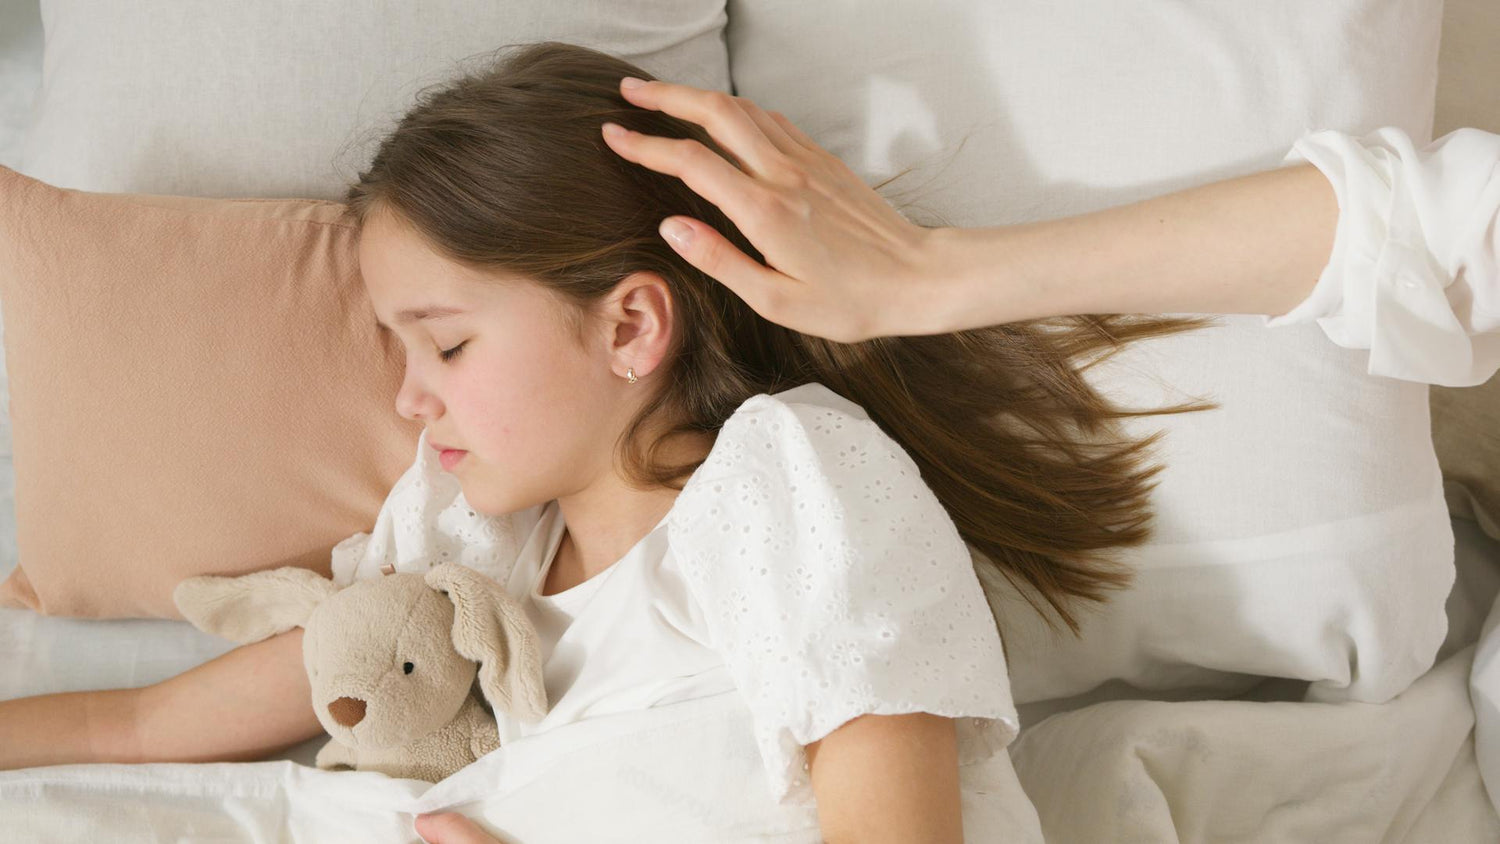 How Do I Ensure a Mattress Is Safe for My Child?